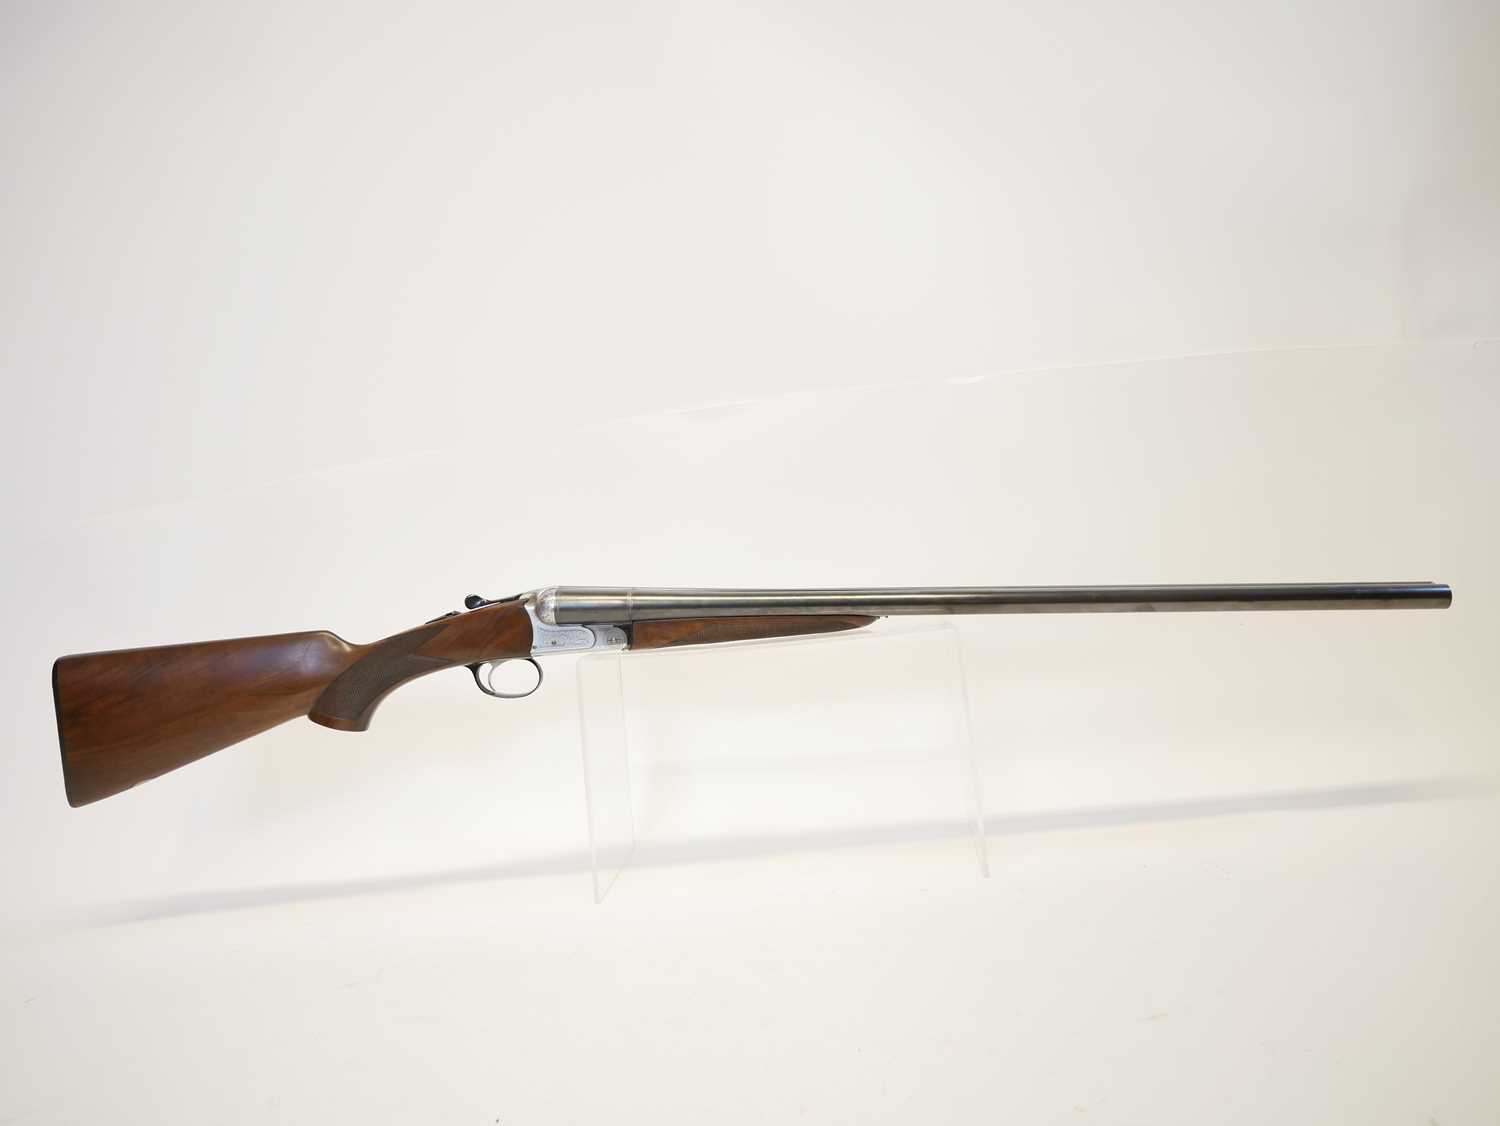 Beretta 12 bore side by side Model 626E shotgun, serial number A40366A, 28inch barrels with half and - Image 2 of 15